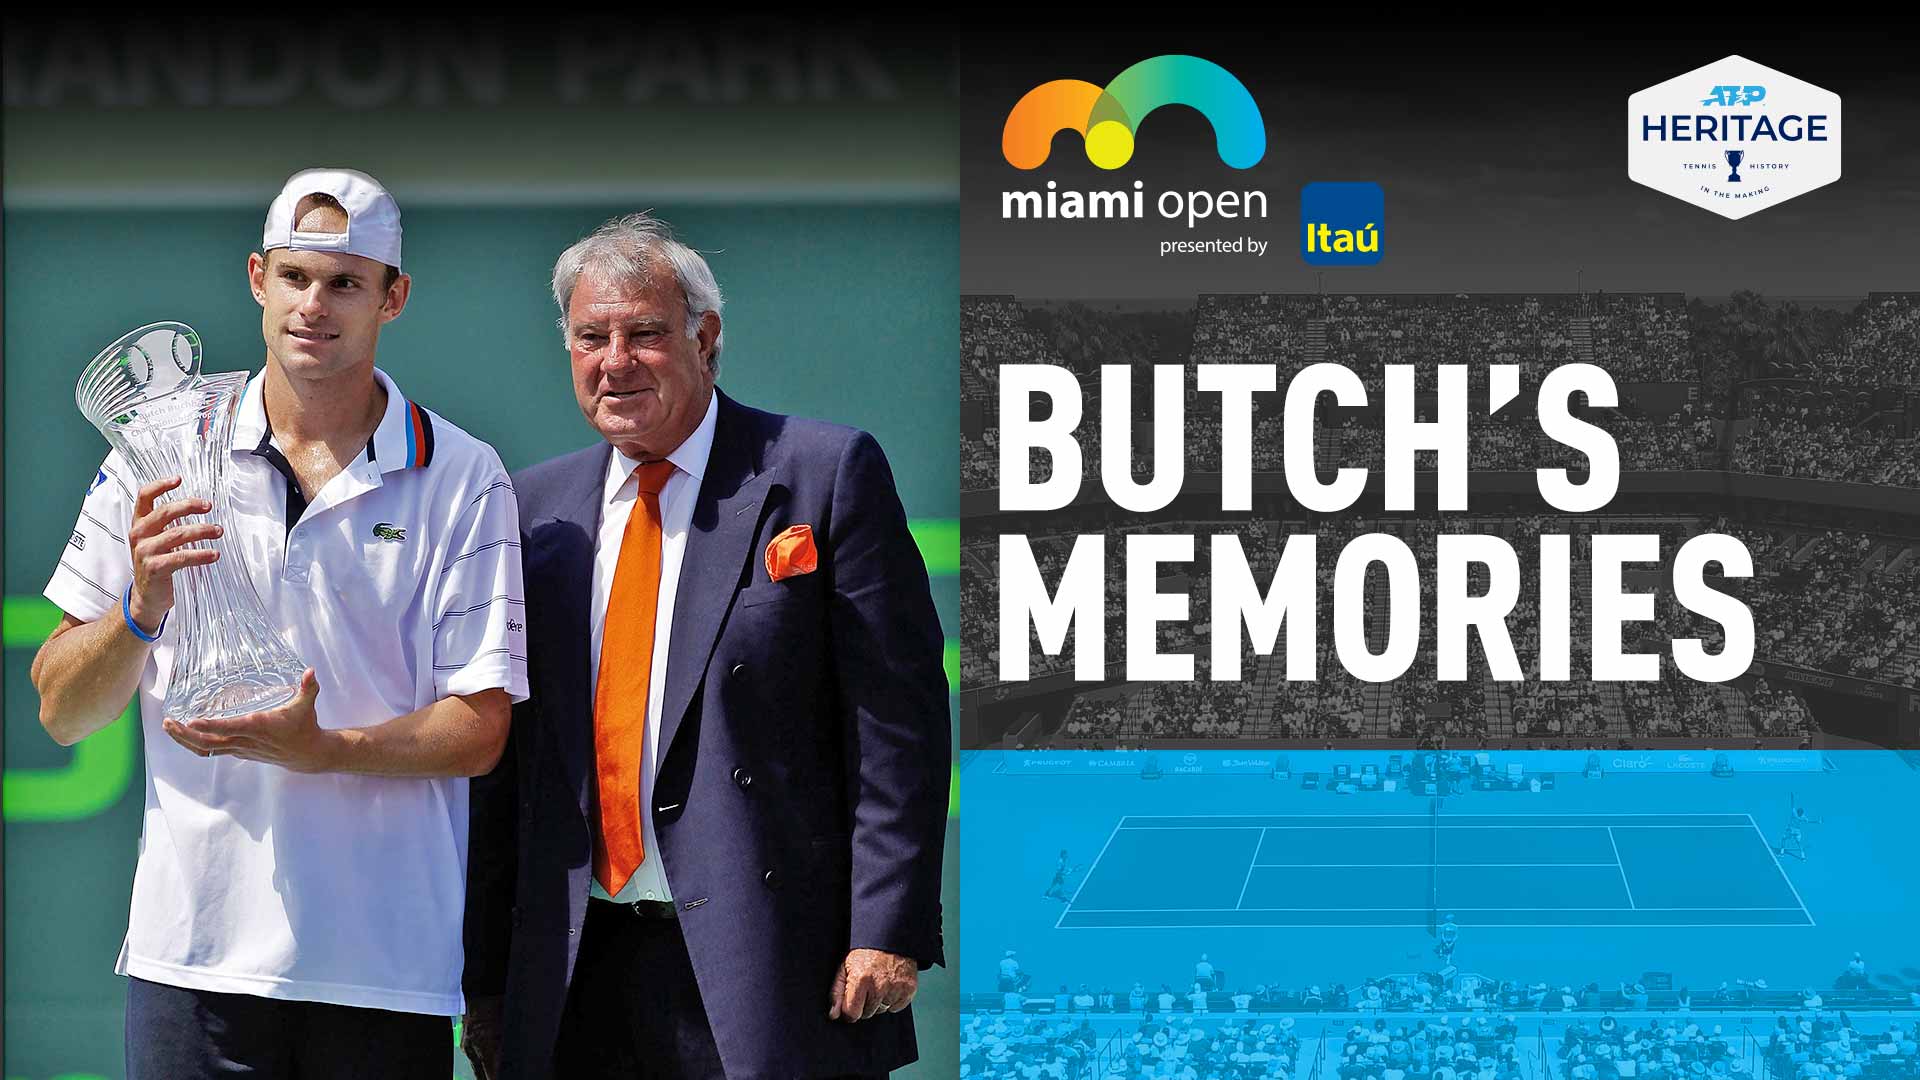 Andy Roddick, the 2010 champion, poses with Miami Open presented by Itau founder Butch Buchholz.